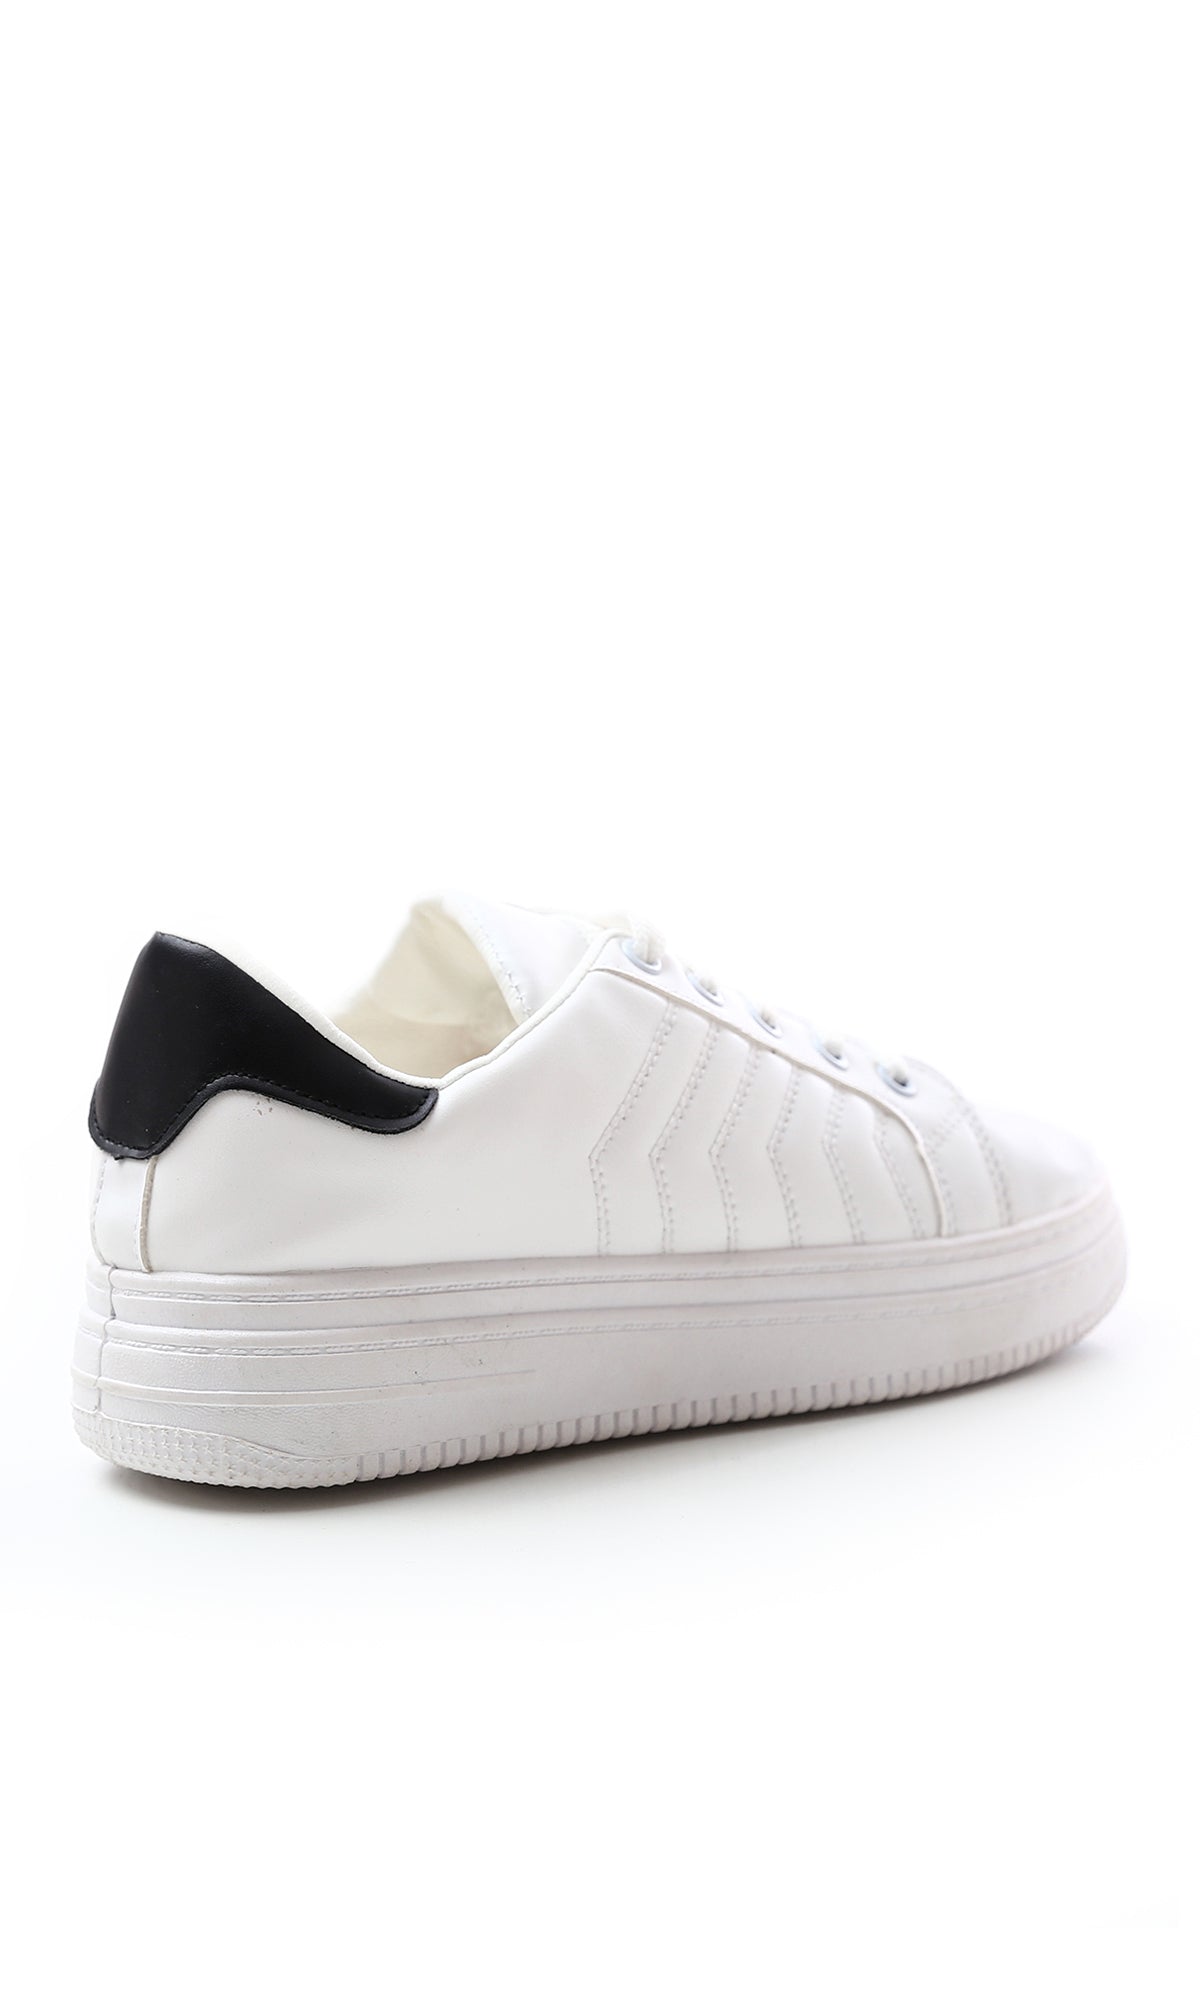 O171292 White & Black Leather Laced Padded Sneakers